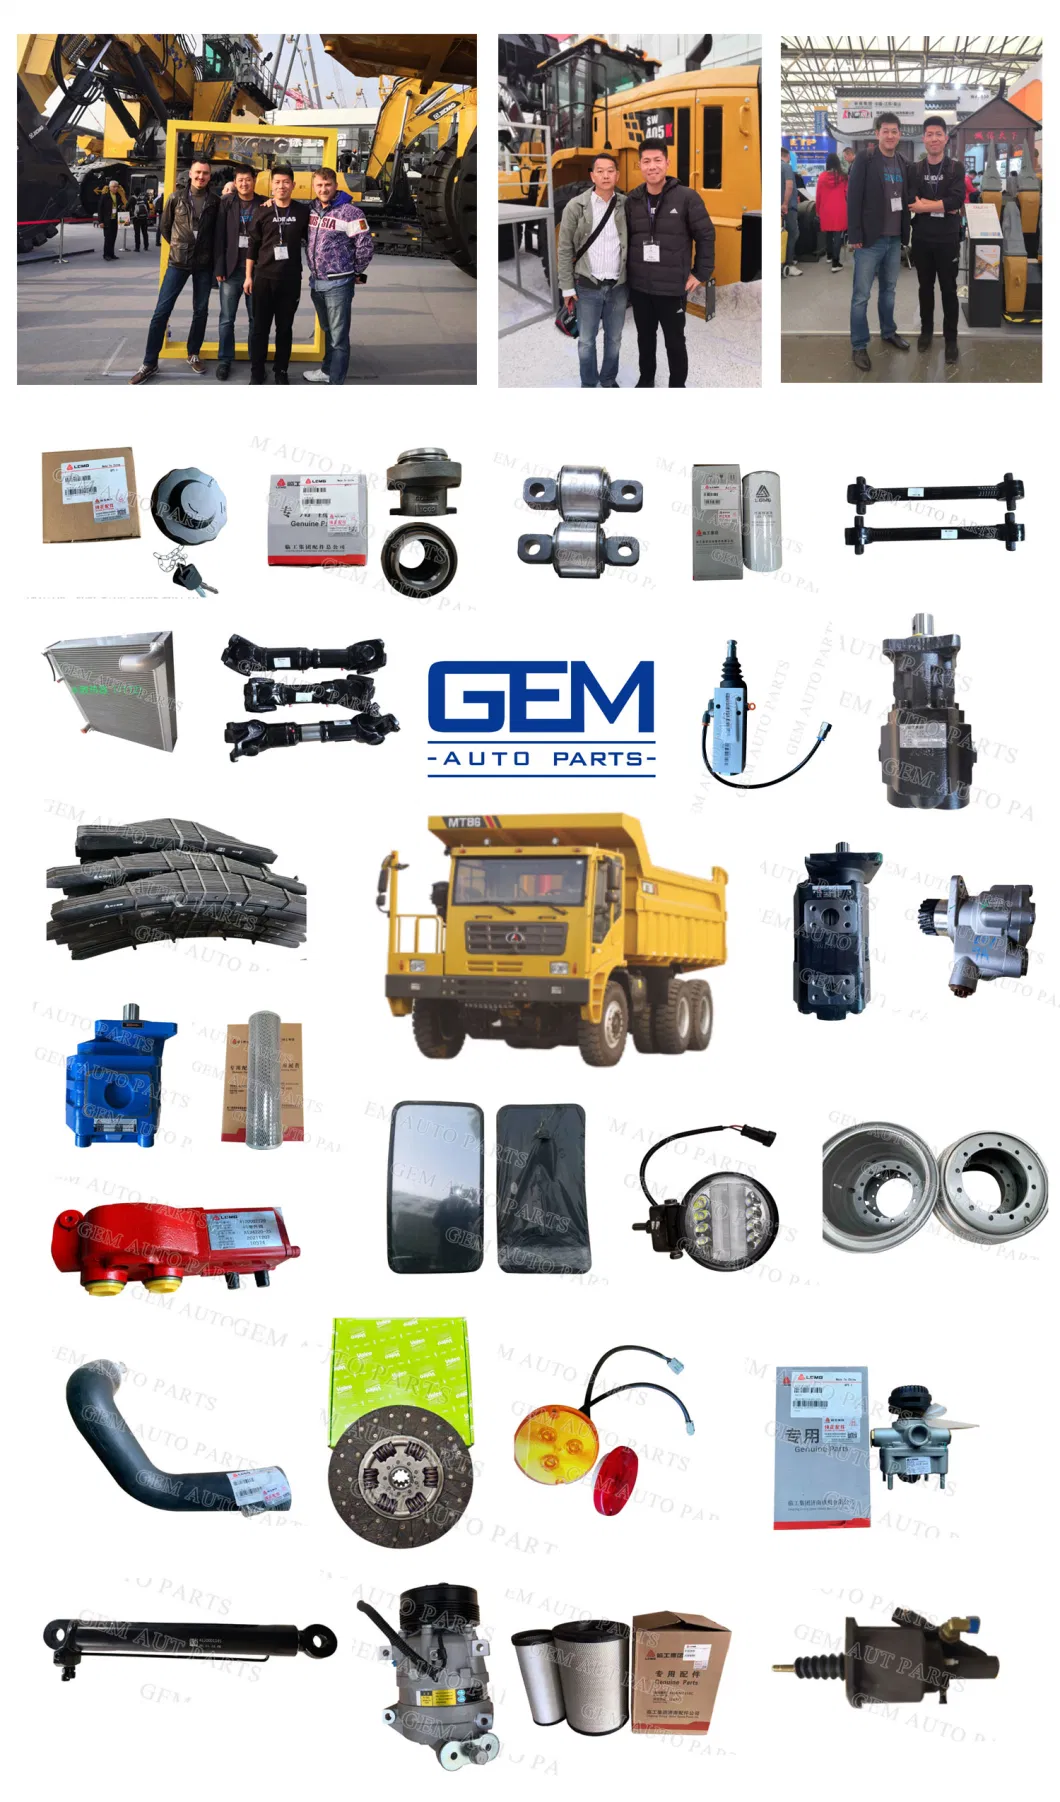 Weichai Engine Wp6 Wd10 for Sdlg XCMG Xgma Liugong Shantui Doosan Excavator Loader Construction Mechinery Truck Spare Parts